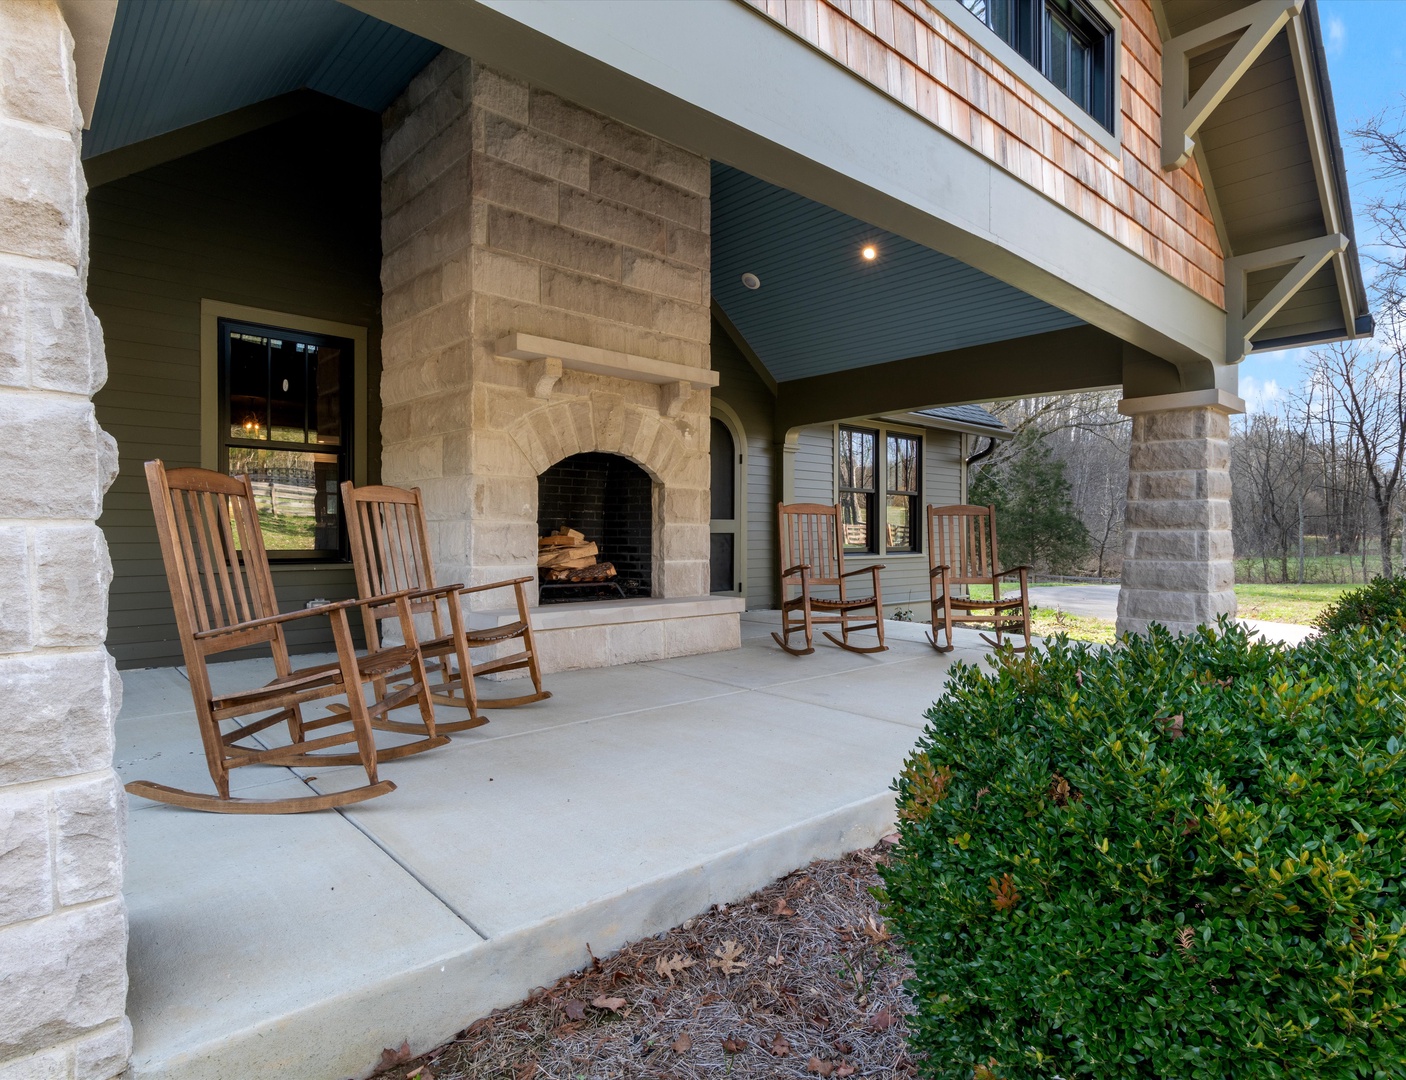 Front porch with rocking chairs, and outdoor fireplace